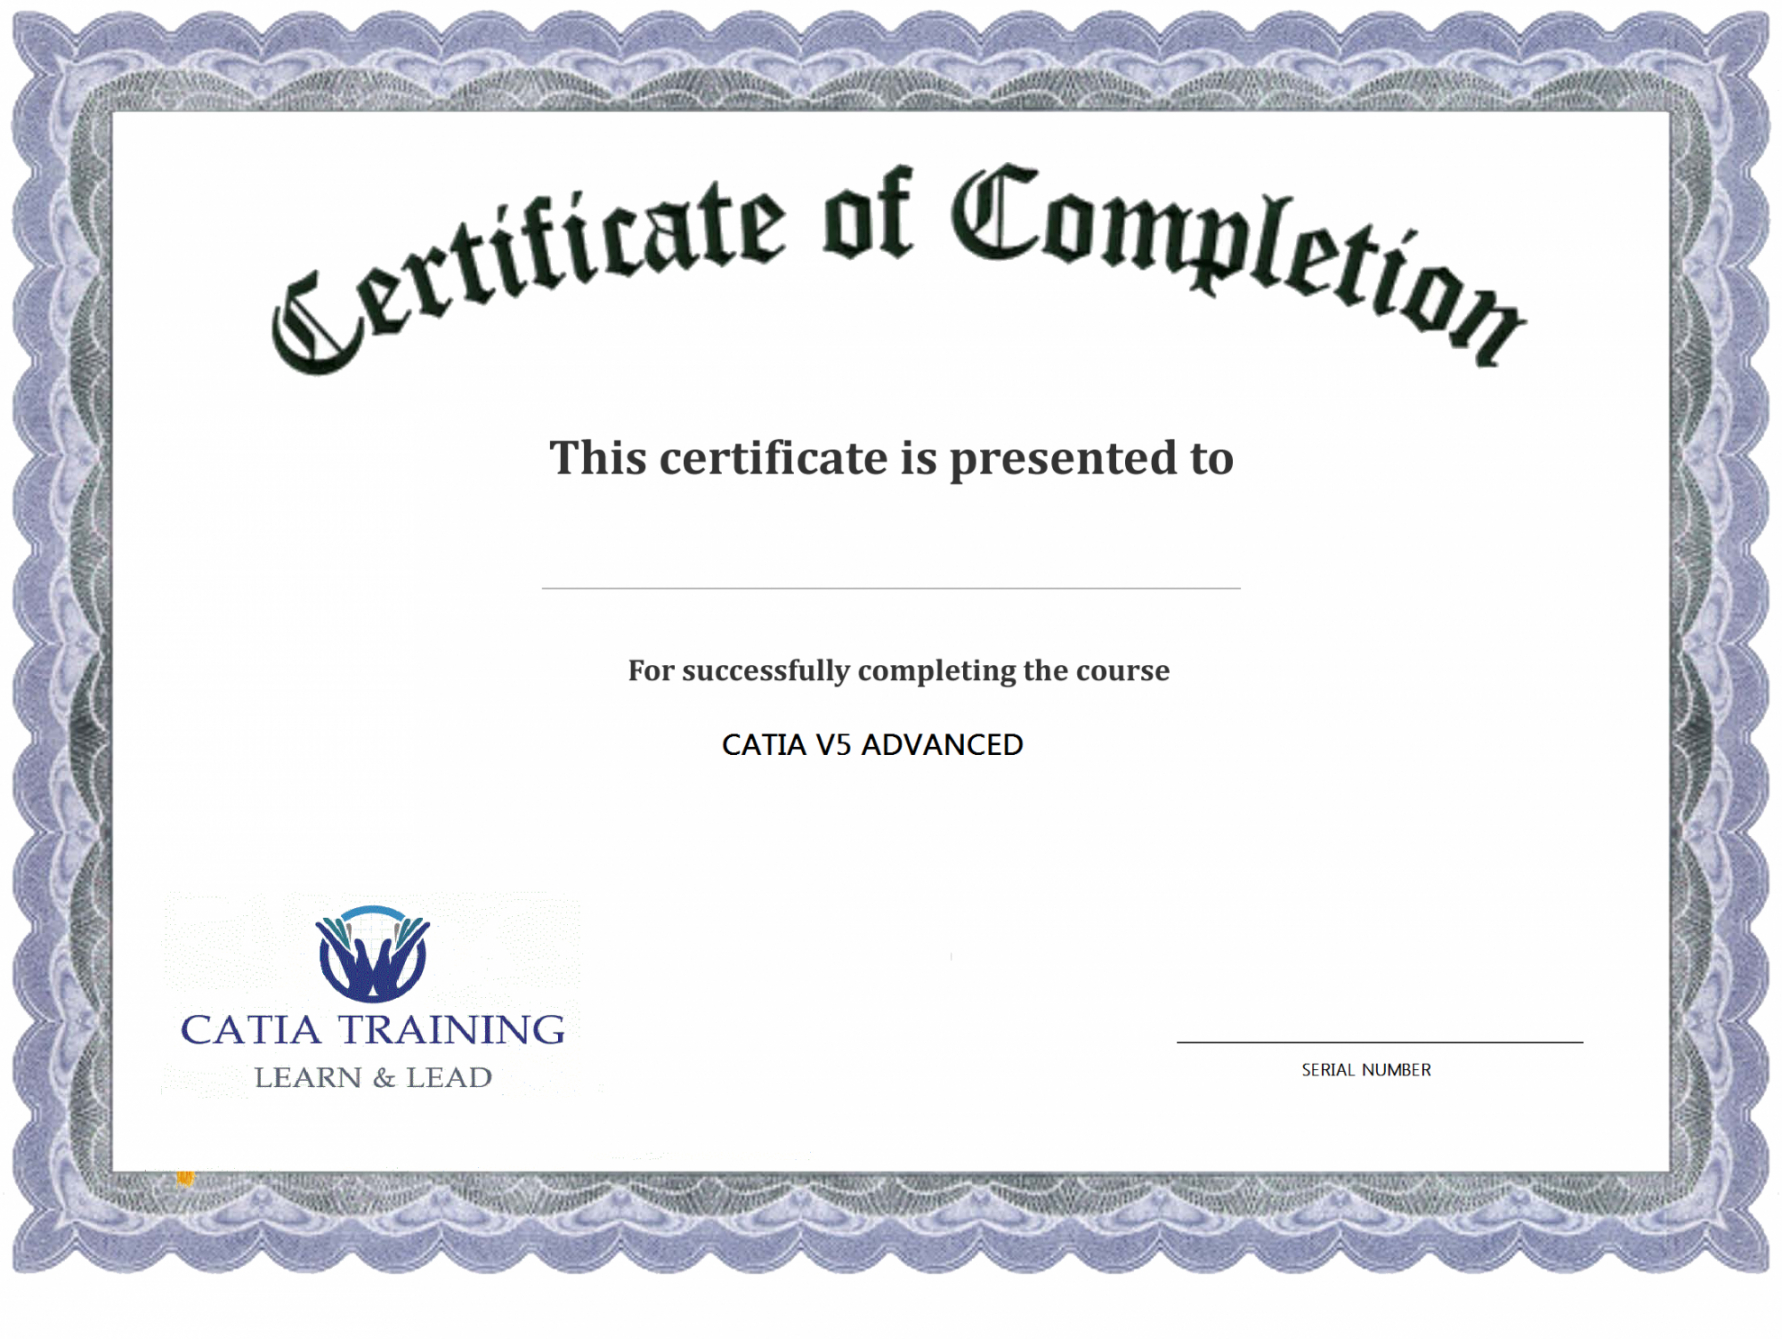 parenting-class-certificate-of-completion-template-emetonlineblog